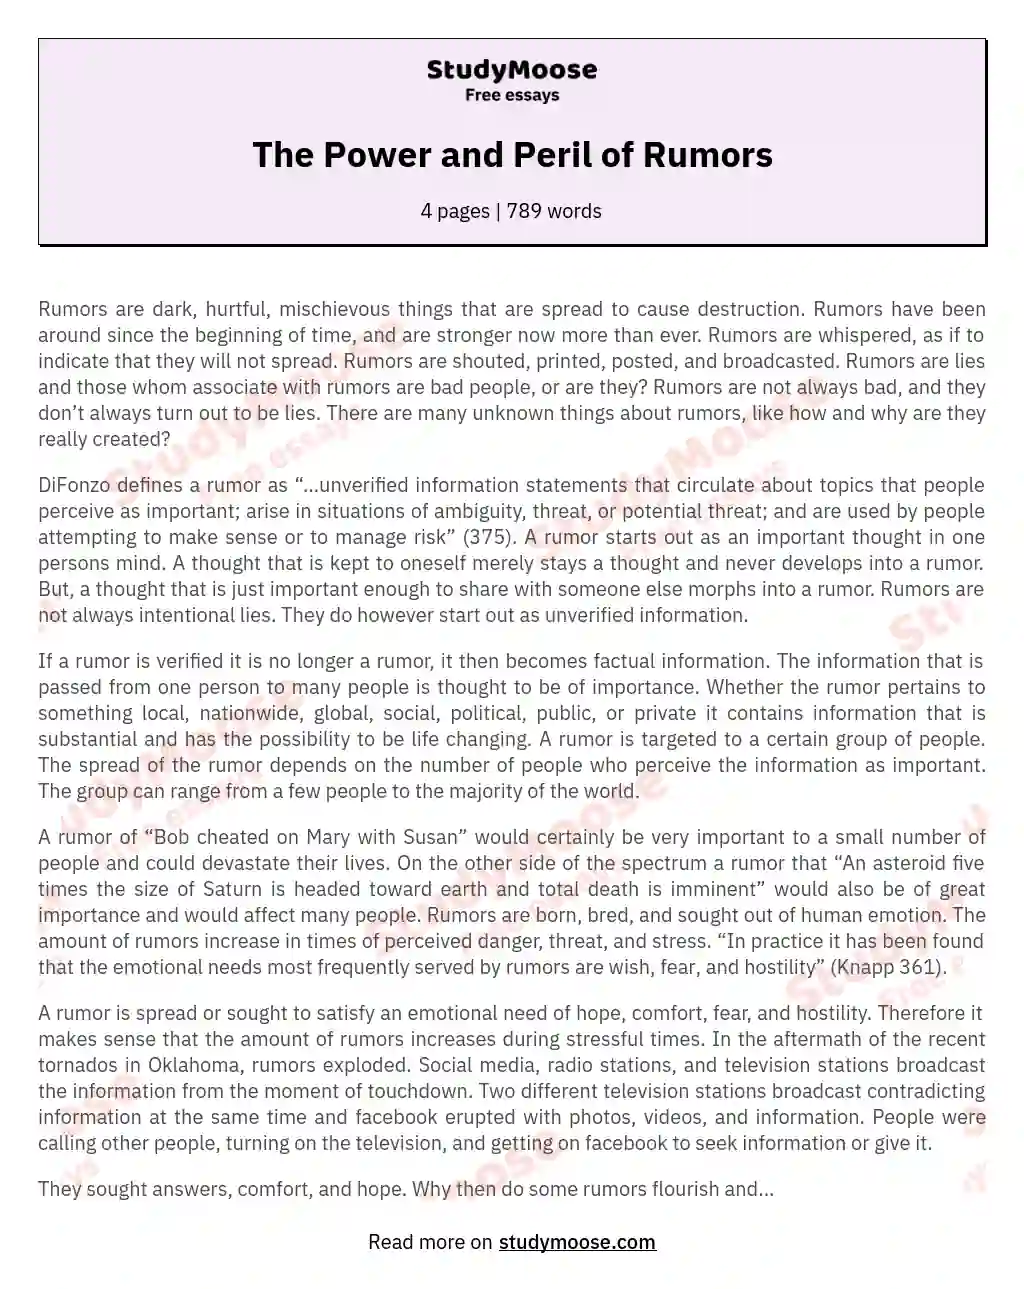 The Power and Peril of Rumors essay